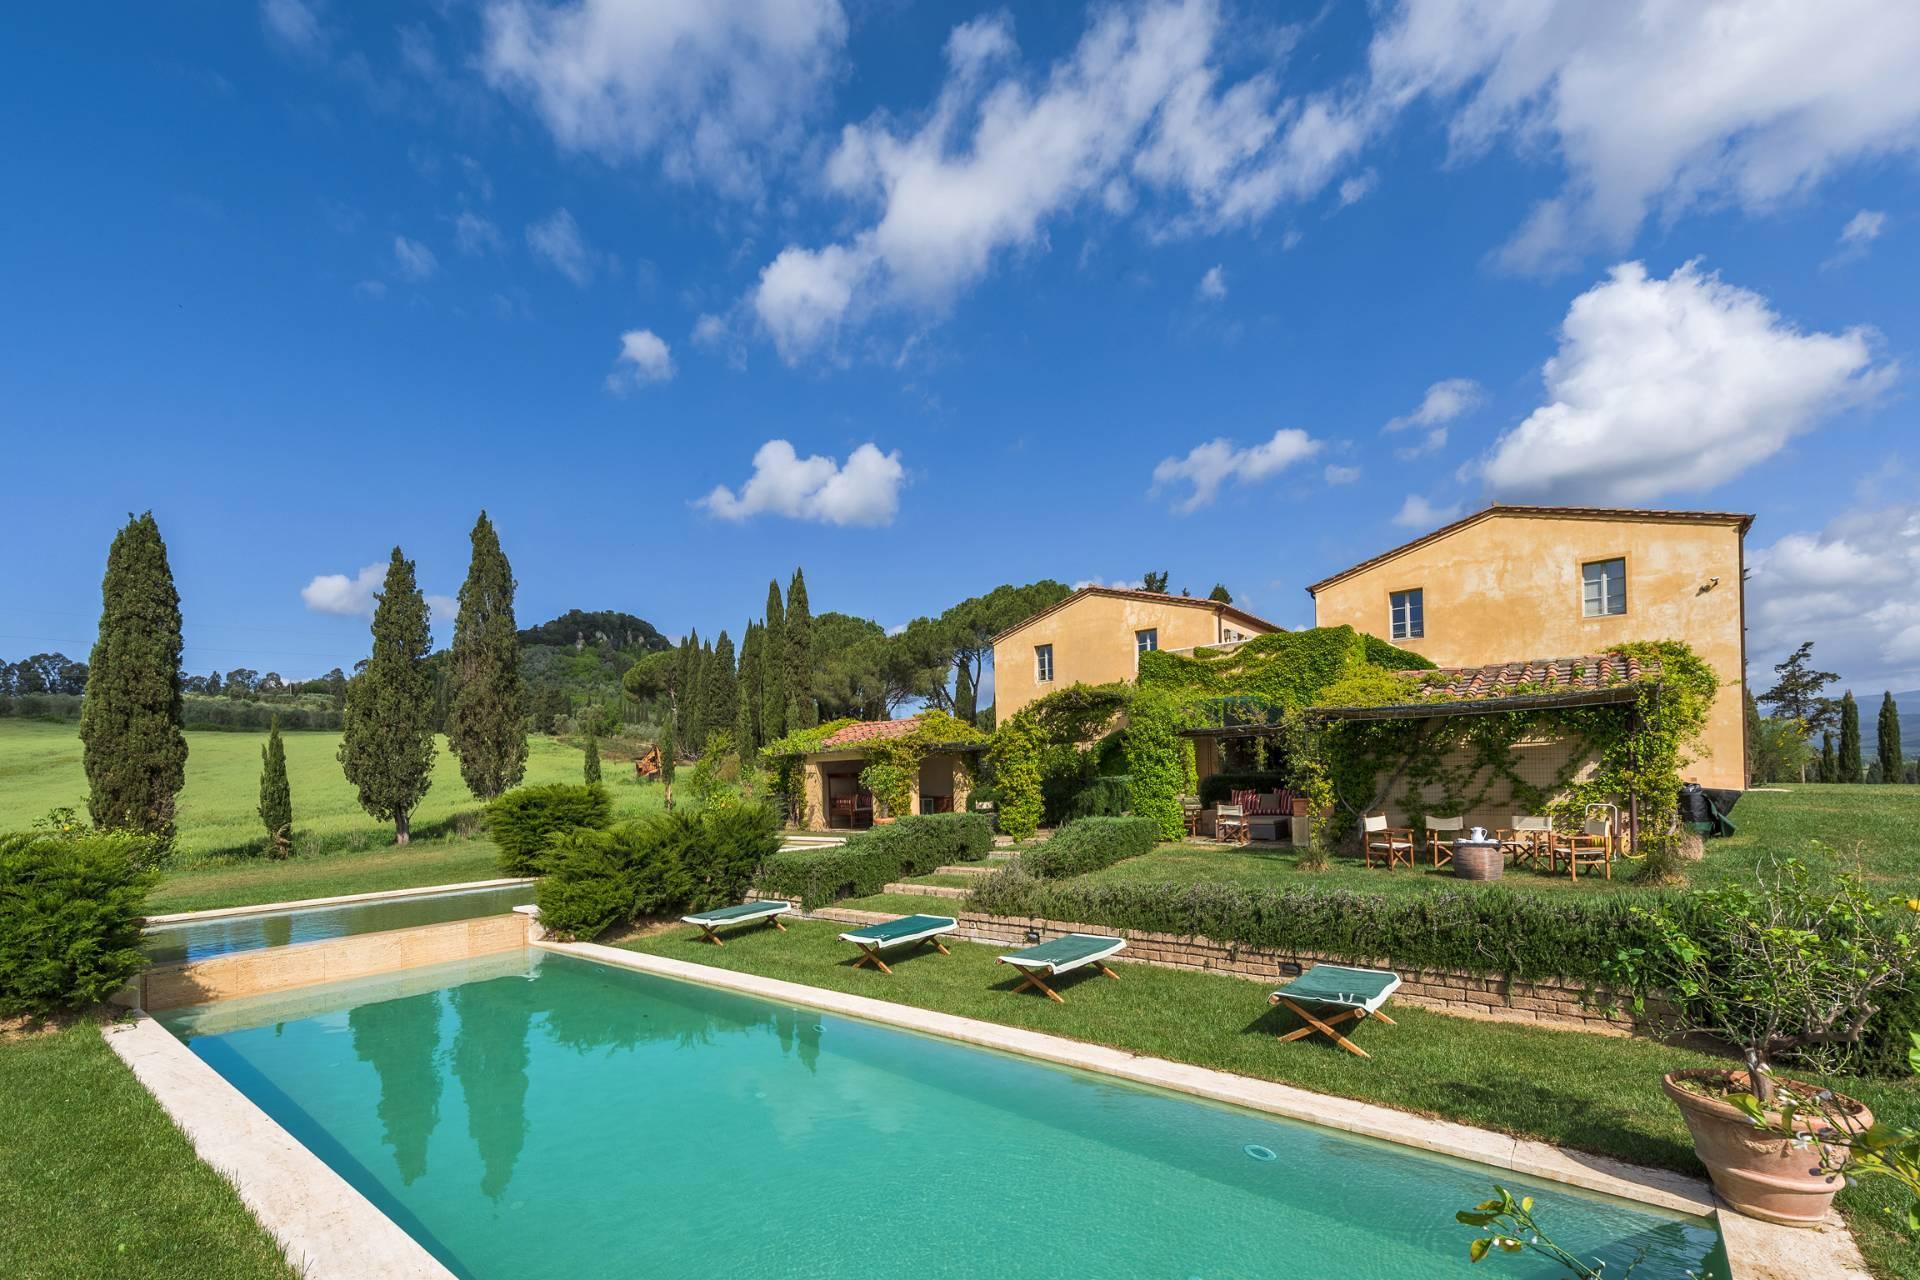 A marvelous luxury mansion in the Tuscan countryside - 1